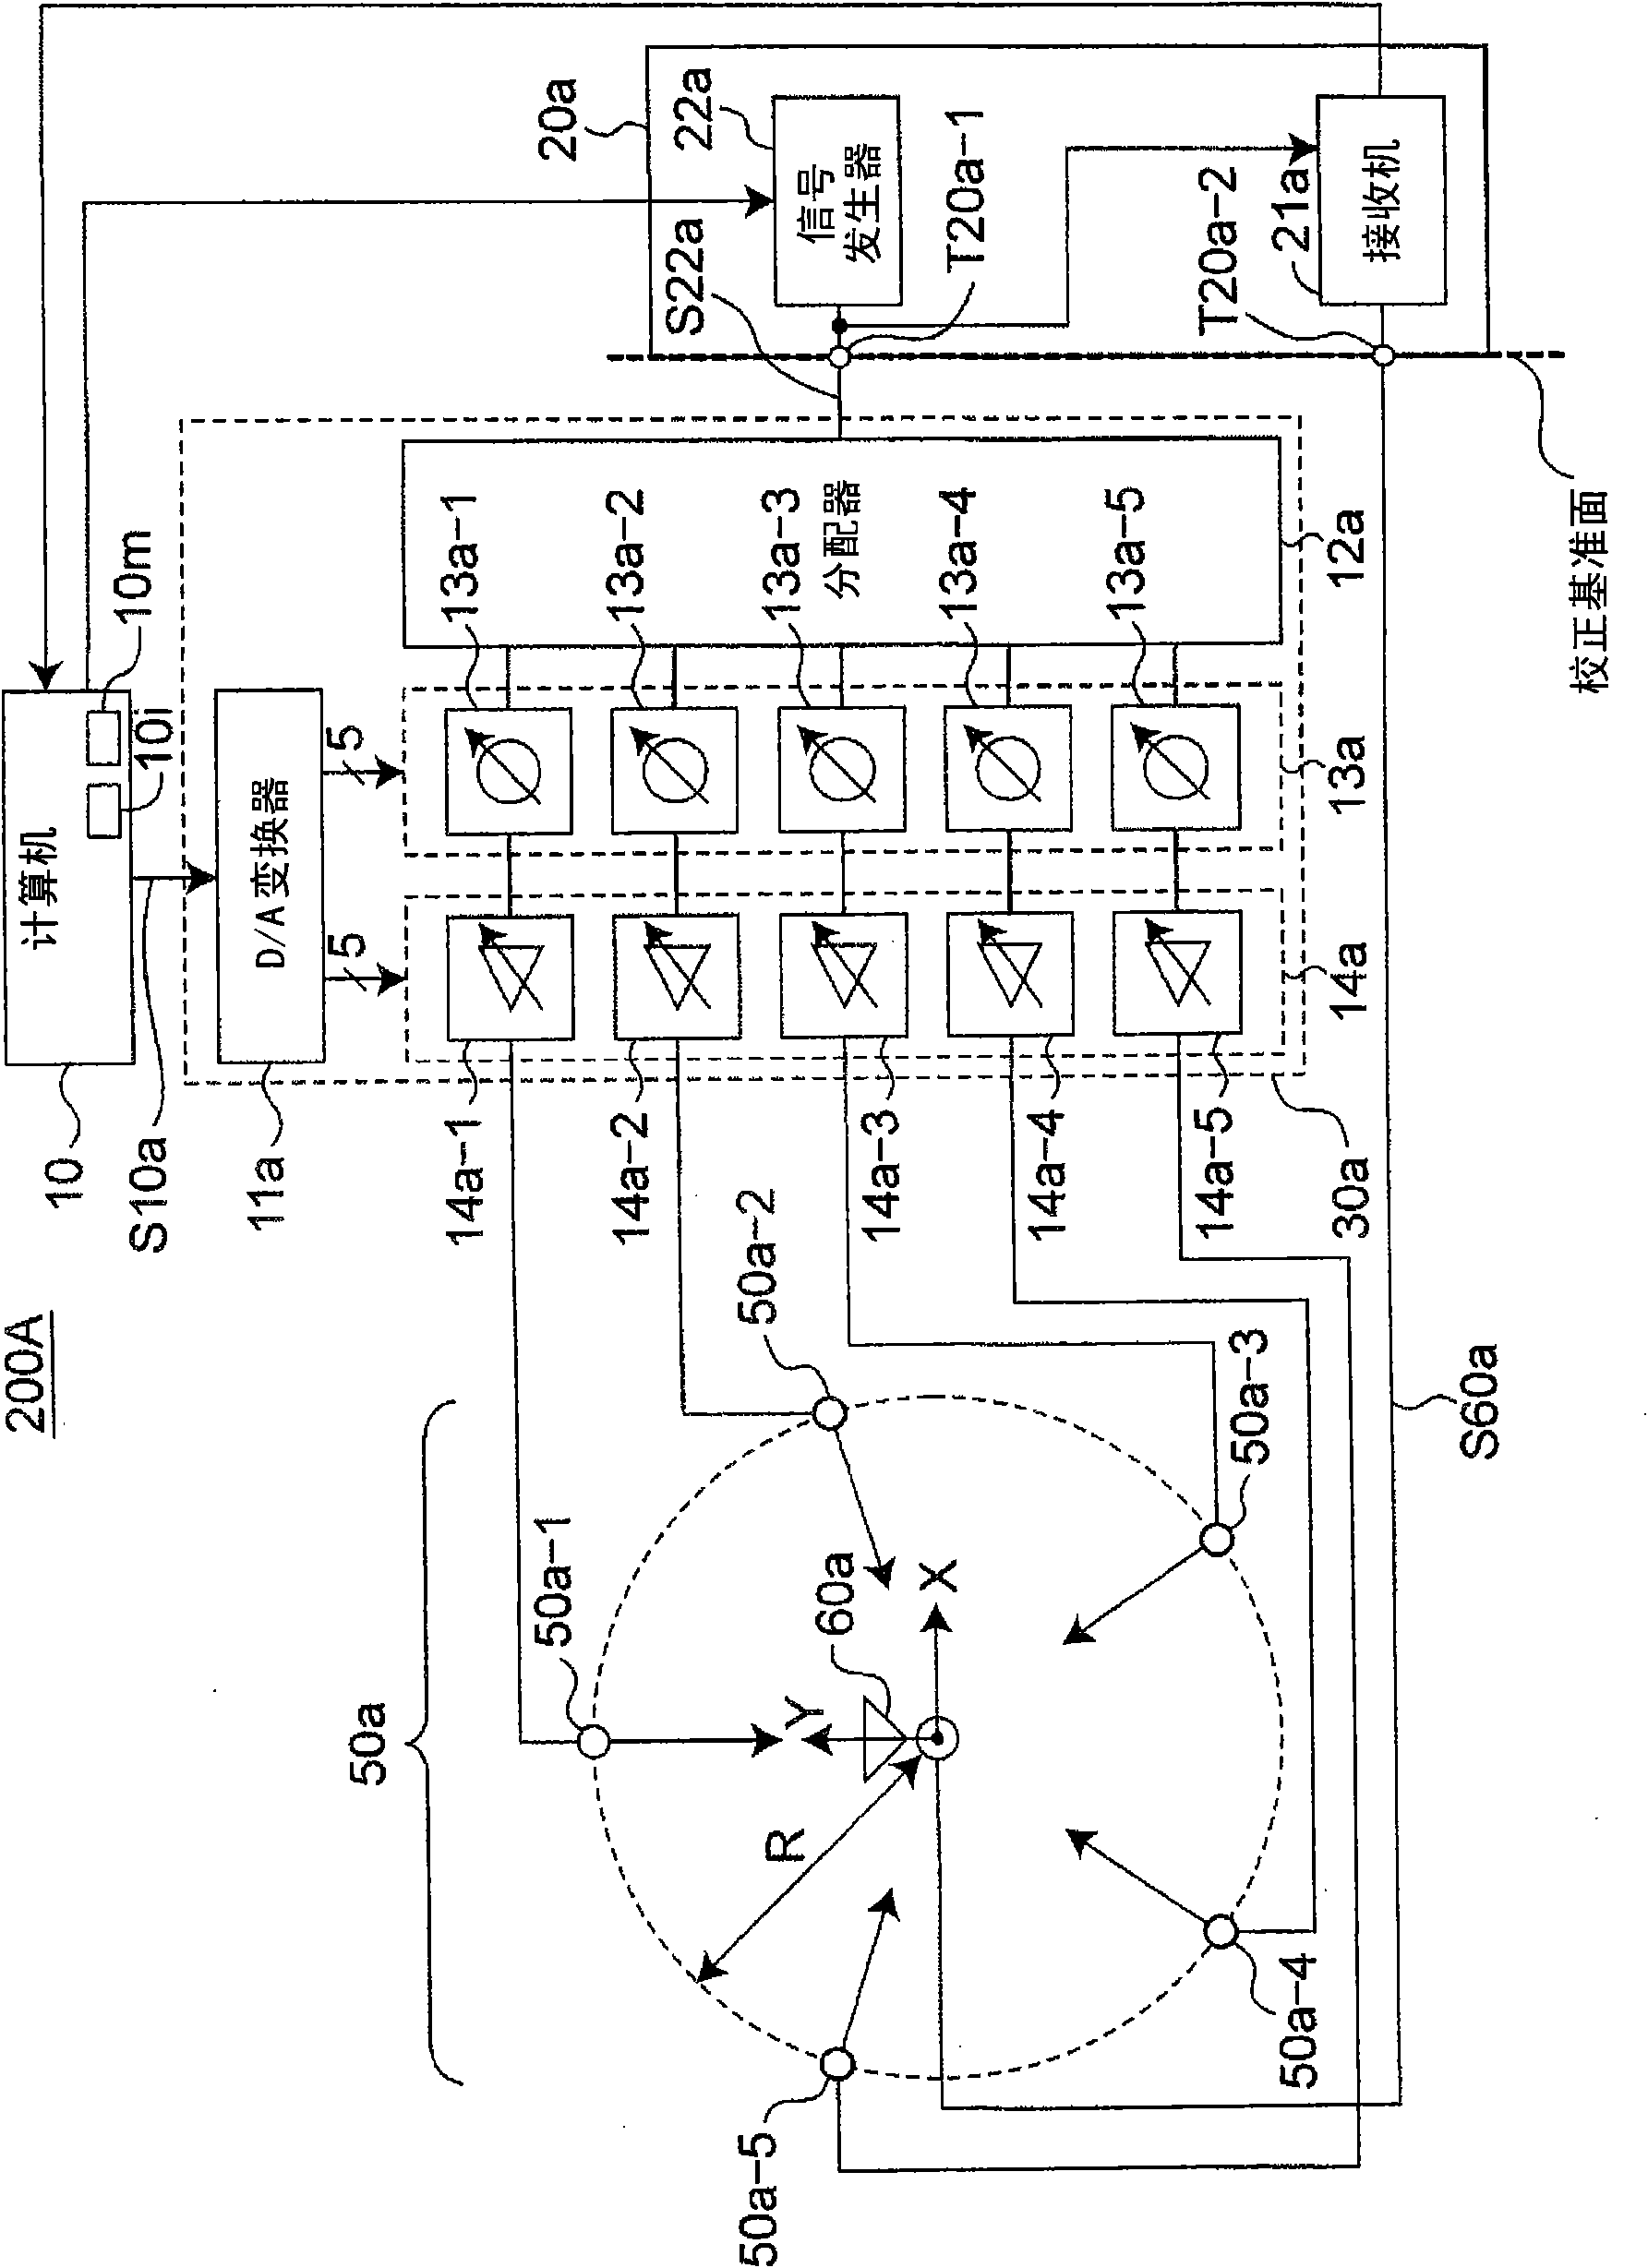 Antenna evaluation device and method